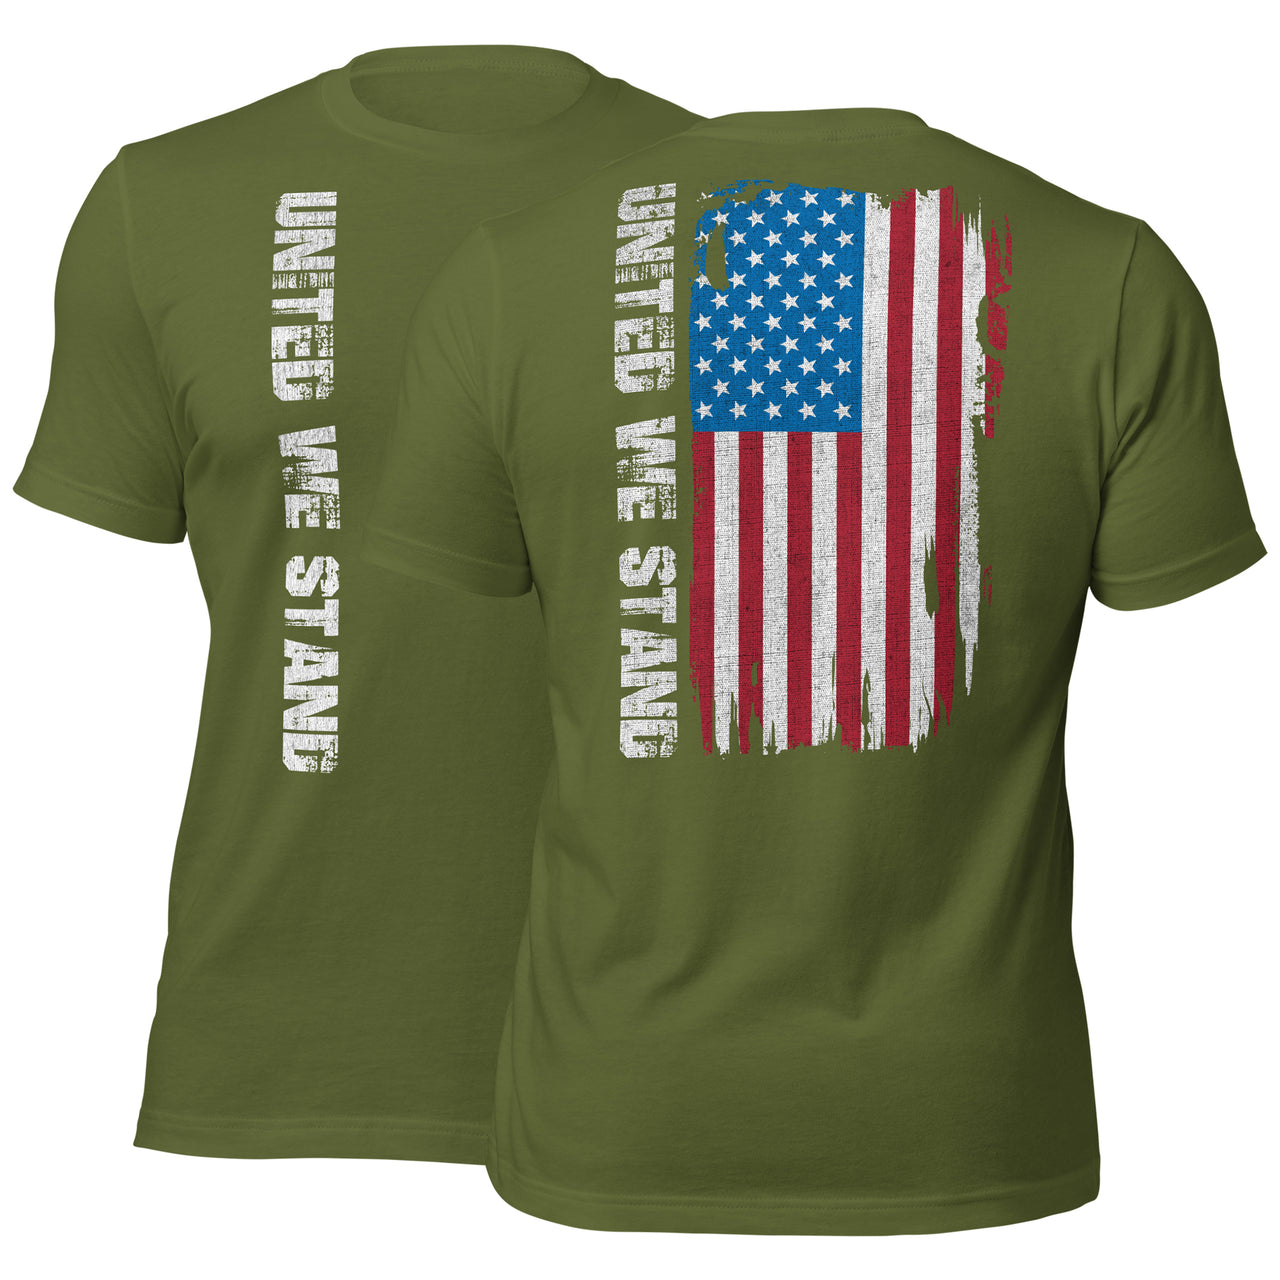 United We Stand Full Color American Flag T-Shirt in green